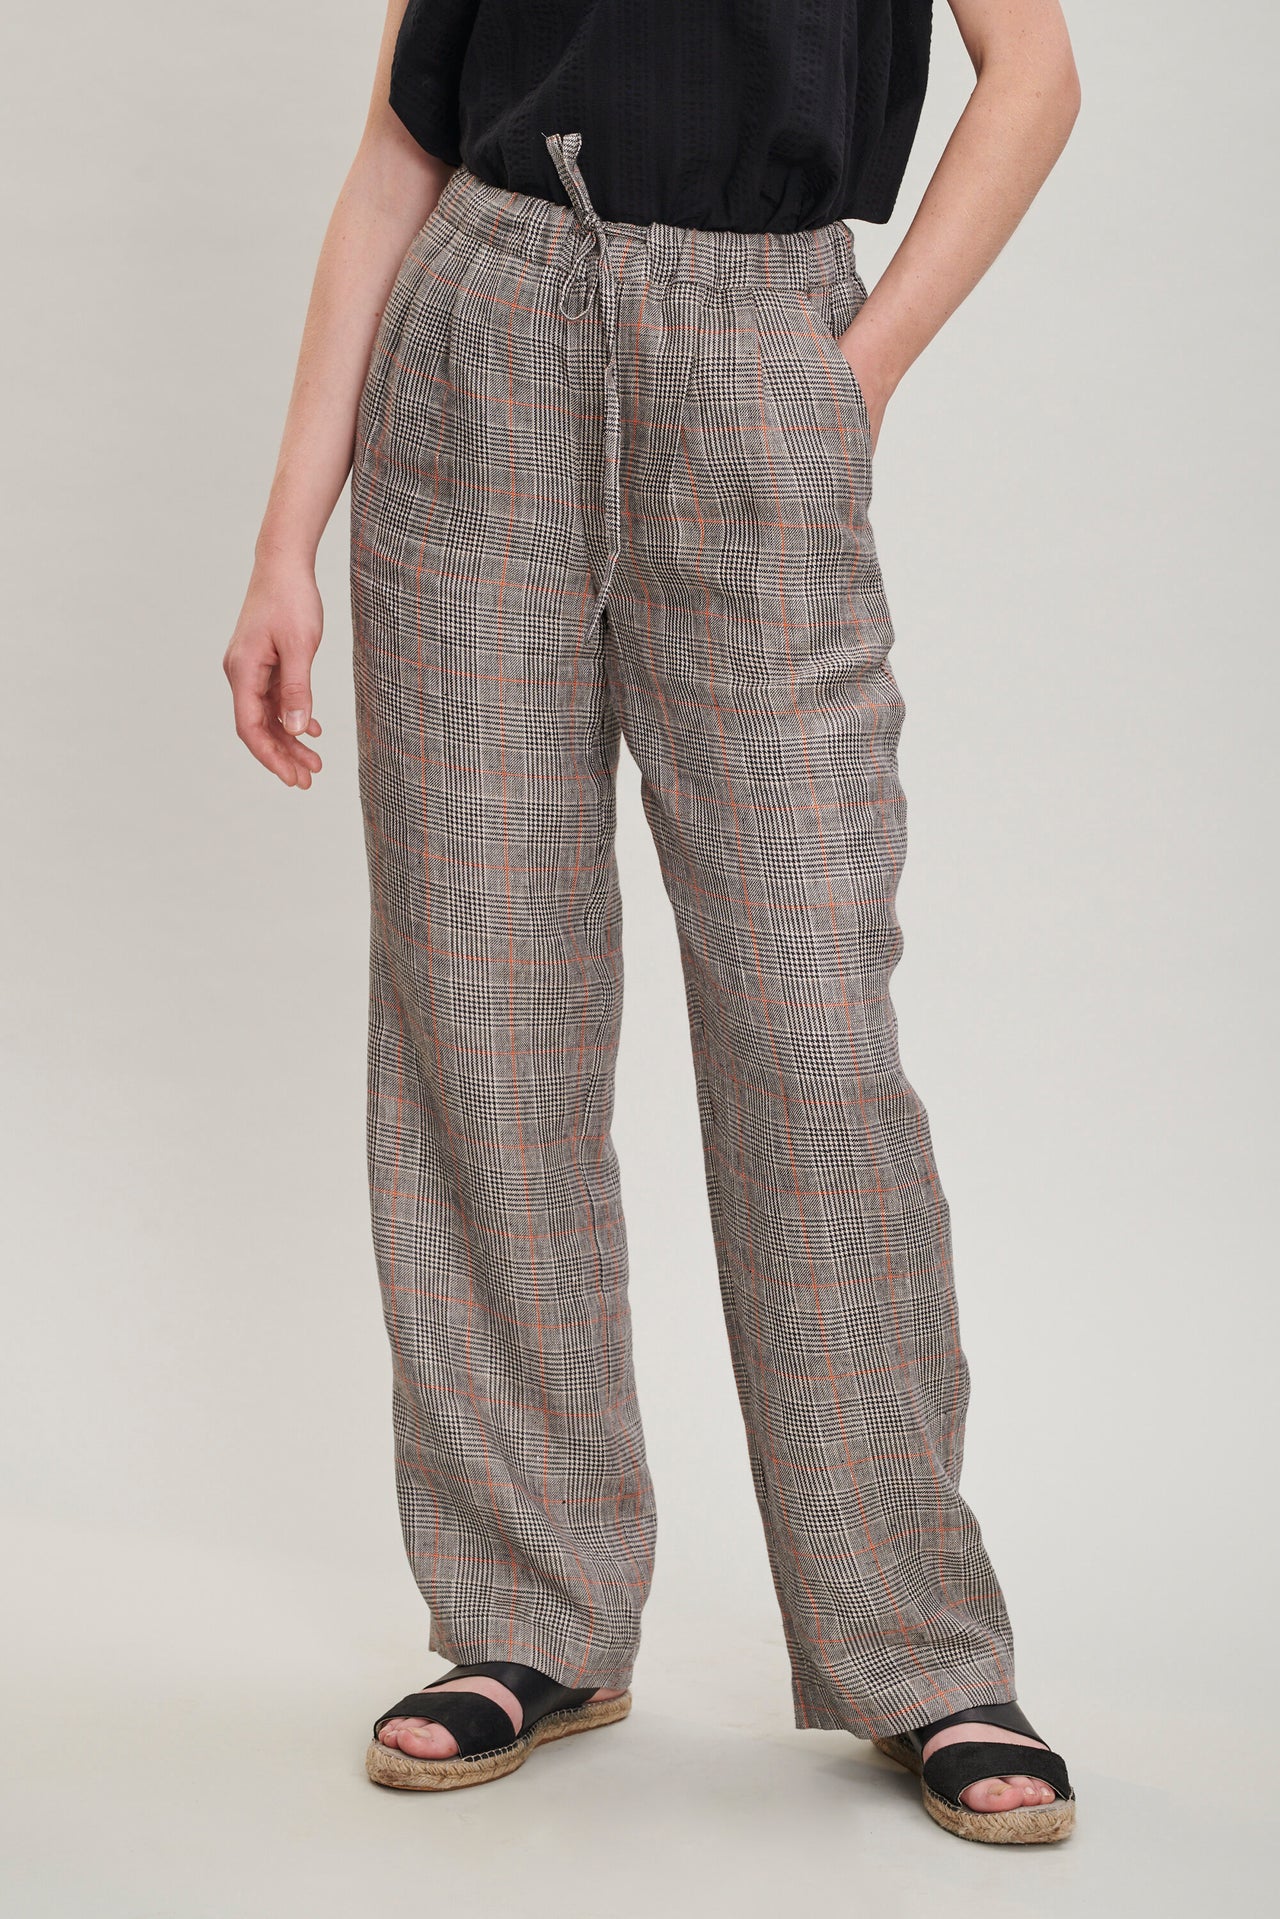 Women's Trousers in a Grey and Vibrant Orange Prince of Wales Italian Linen by Albini